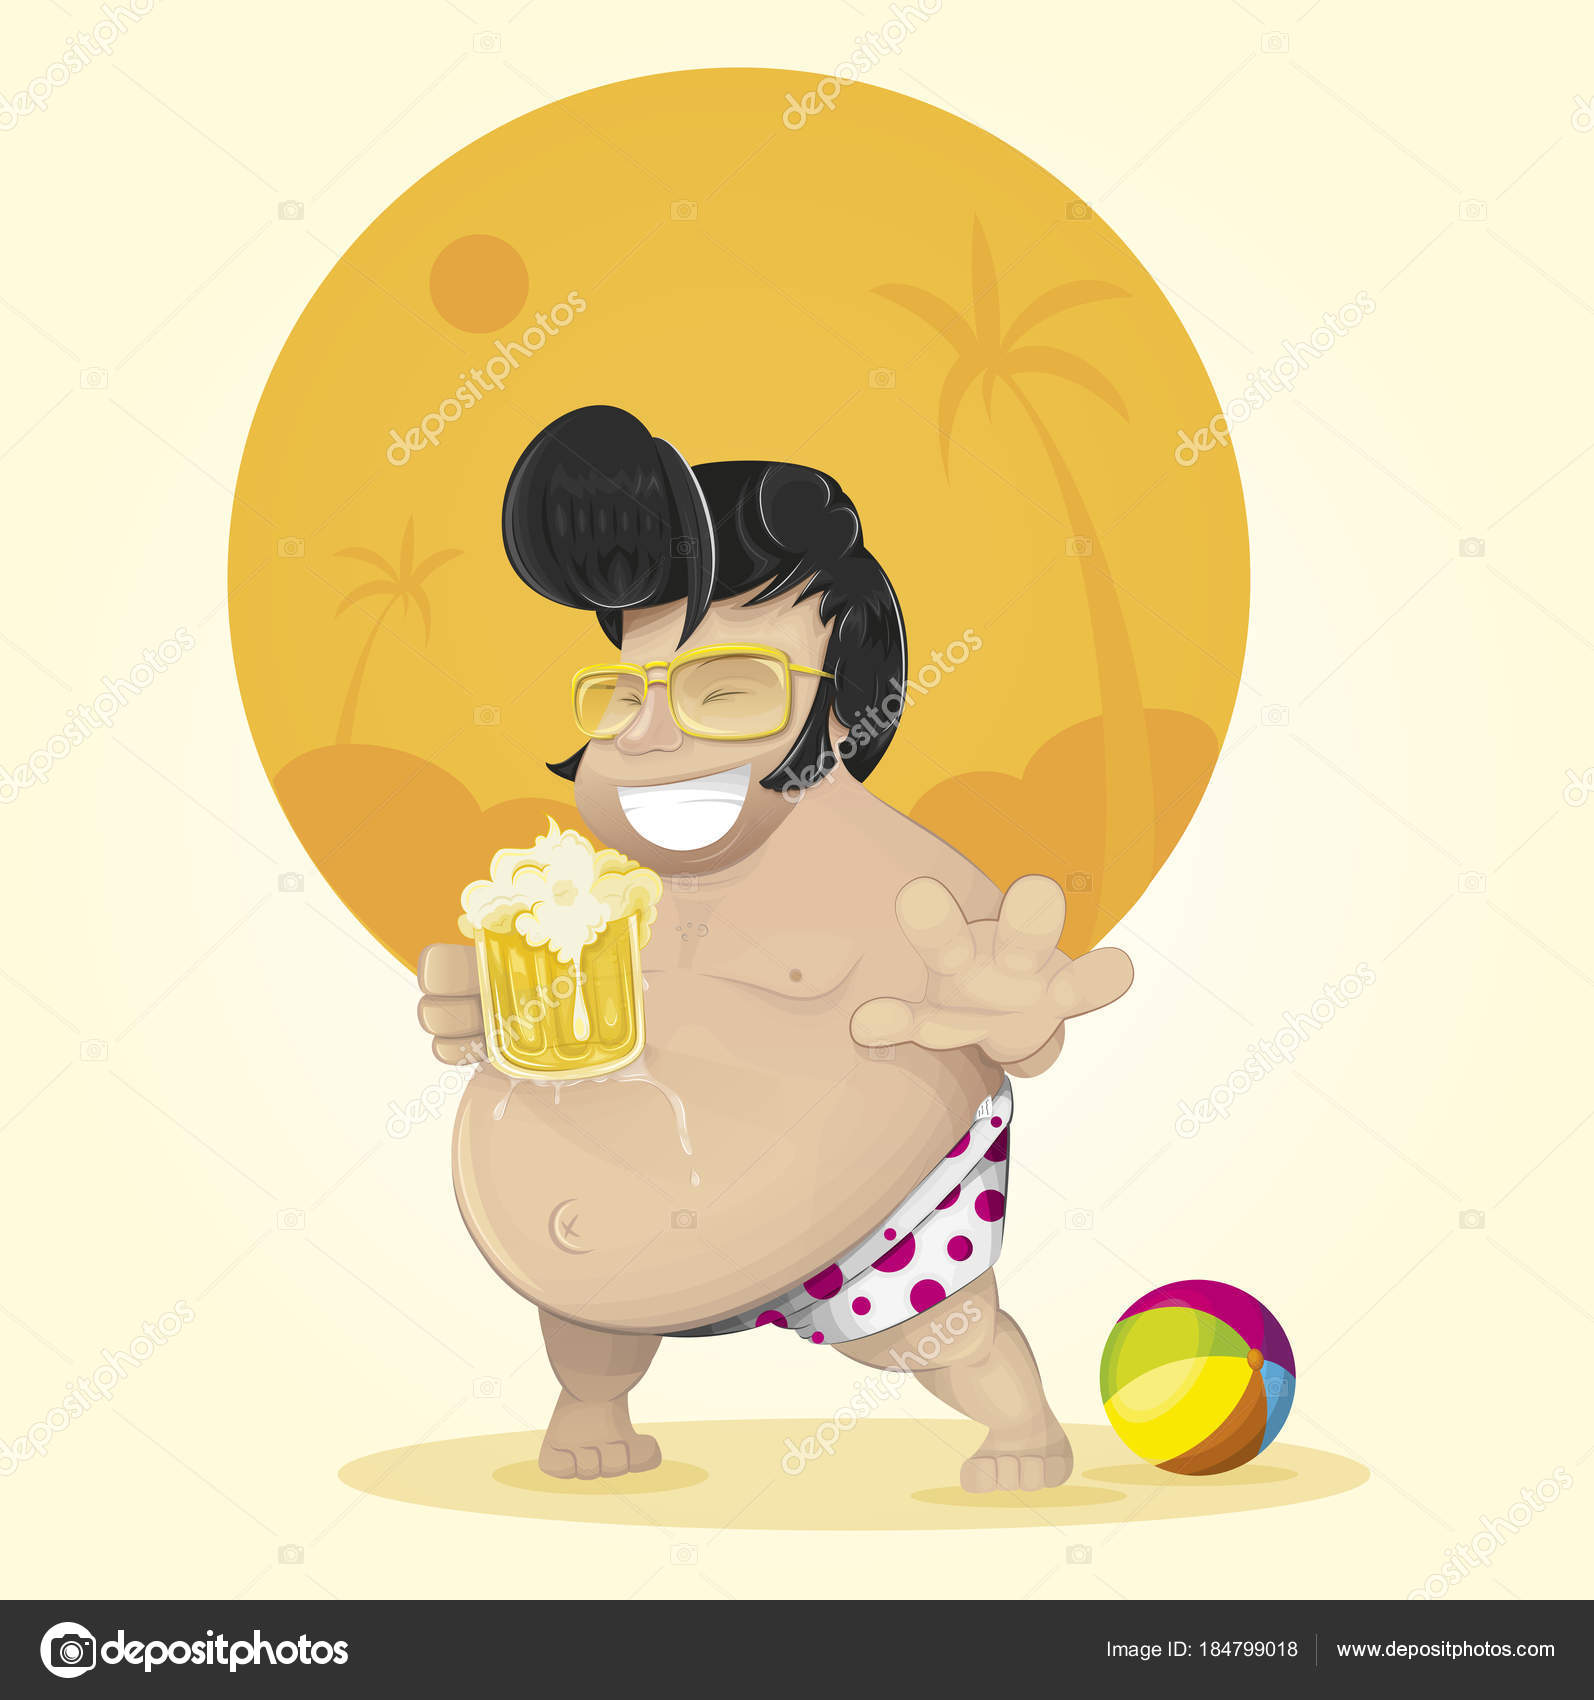 wearing golden glasses, enjoying the summer with a beer in his hand, wearin...